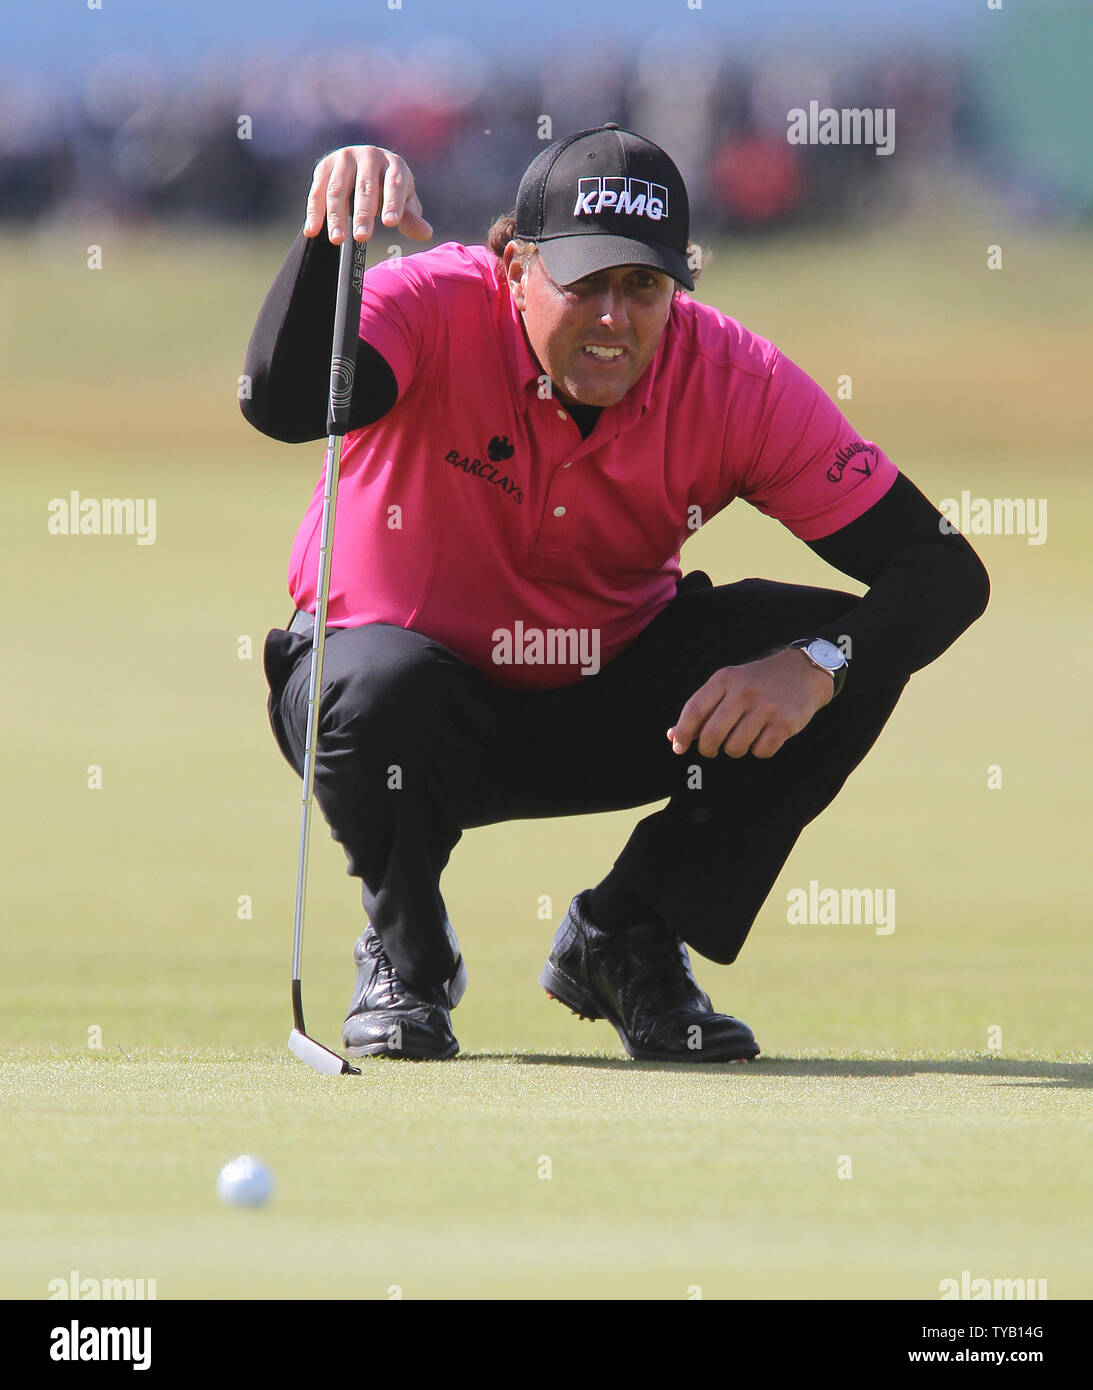 American Phil Mickelson lines up a putt on the 12th green on the first day of the Open championship in St.Andrews, Scotland on July 15, 2010.   UPI/Hugo Philpott Stock Photo